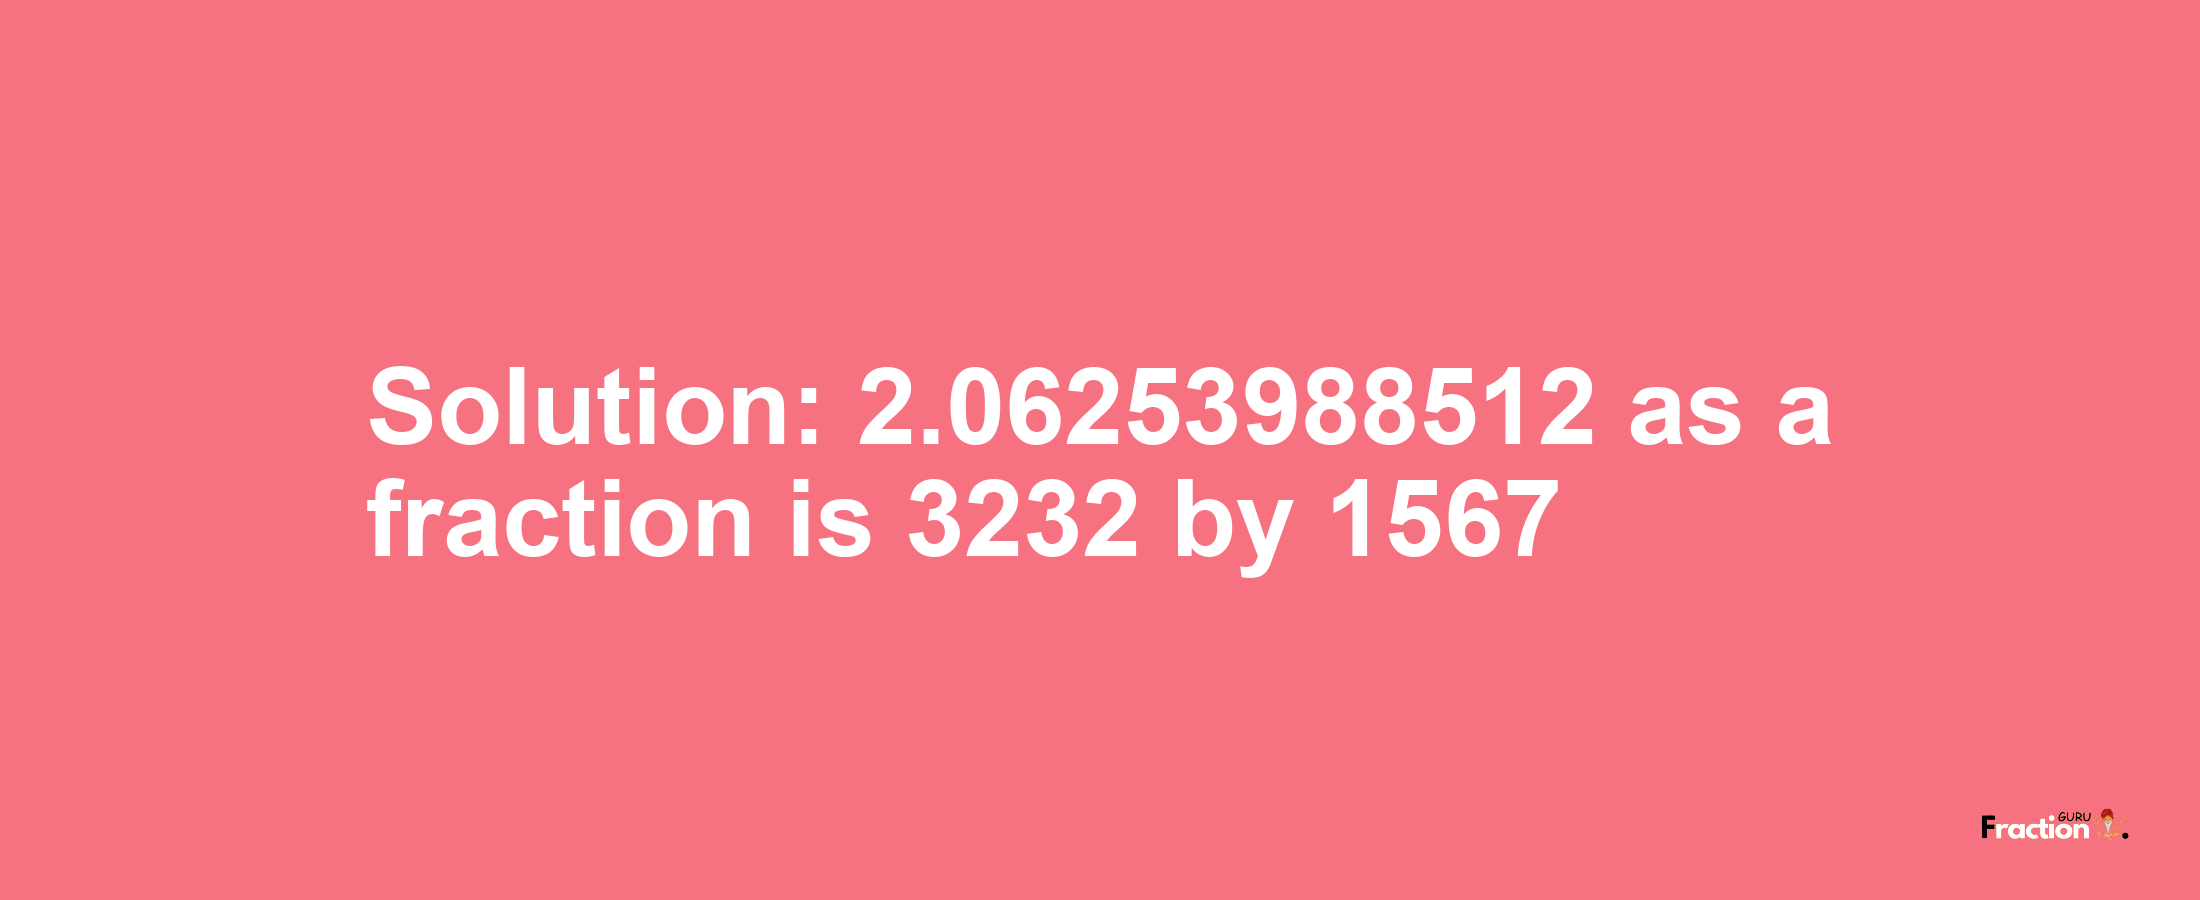 Solution:2.06253988512 as a fraction is 3232/1567